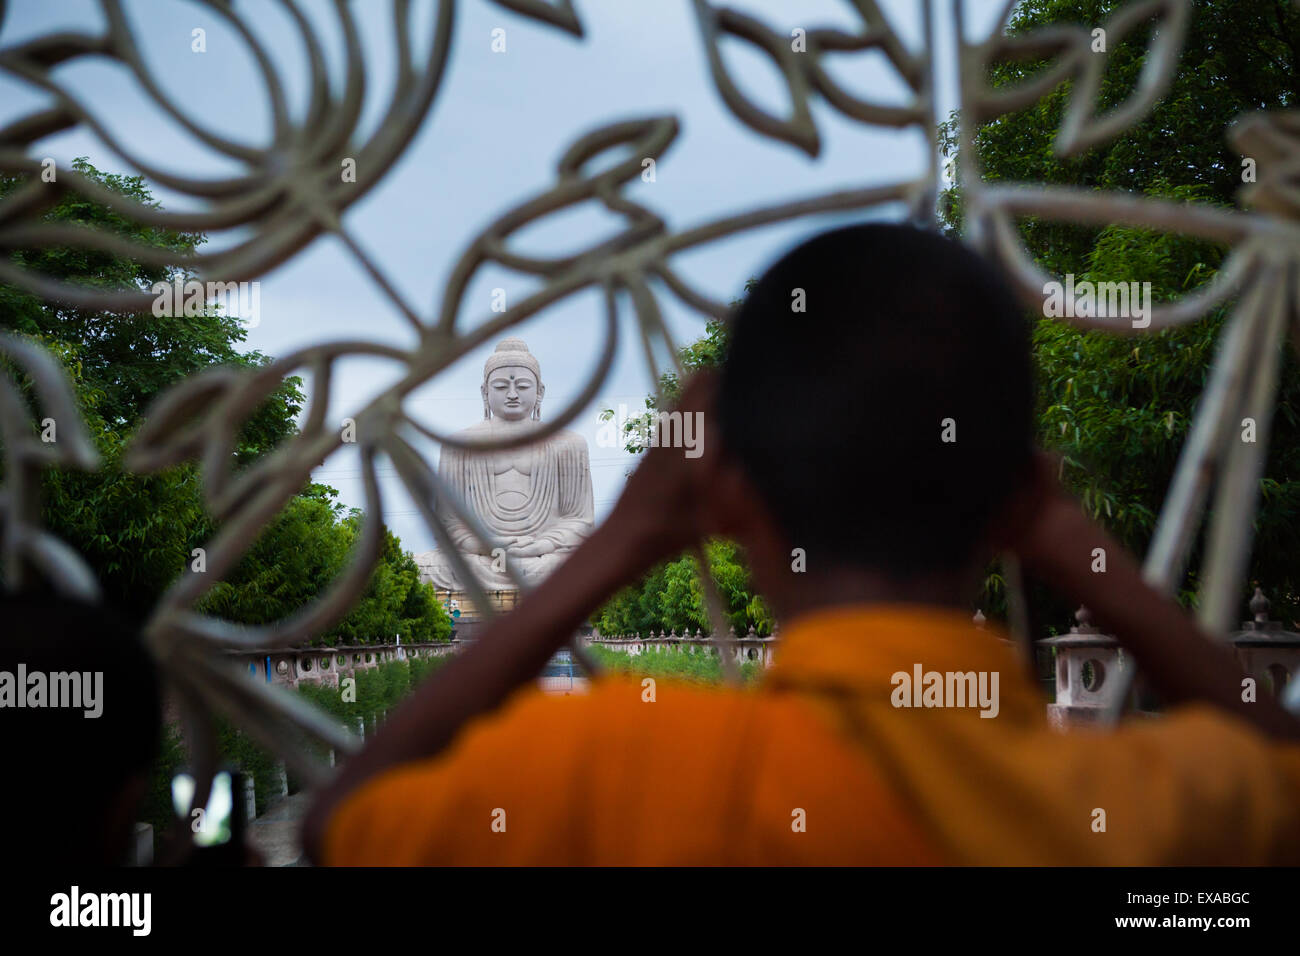 A monk is looking at a 64-feet-high Great Buddha statue from behind the fence in Bodh Gaya, Bihar, India. Stock Photo